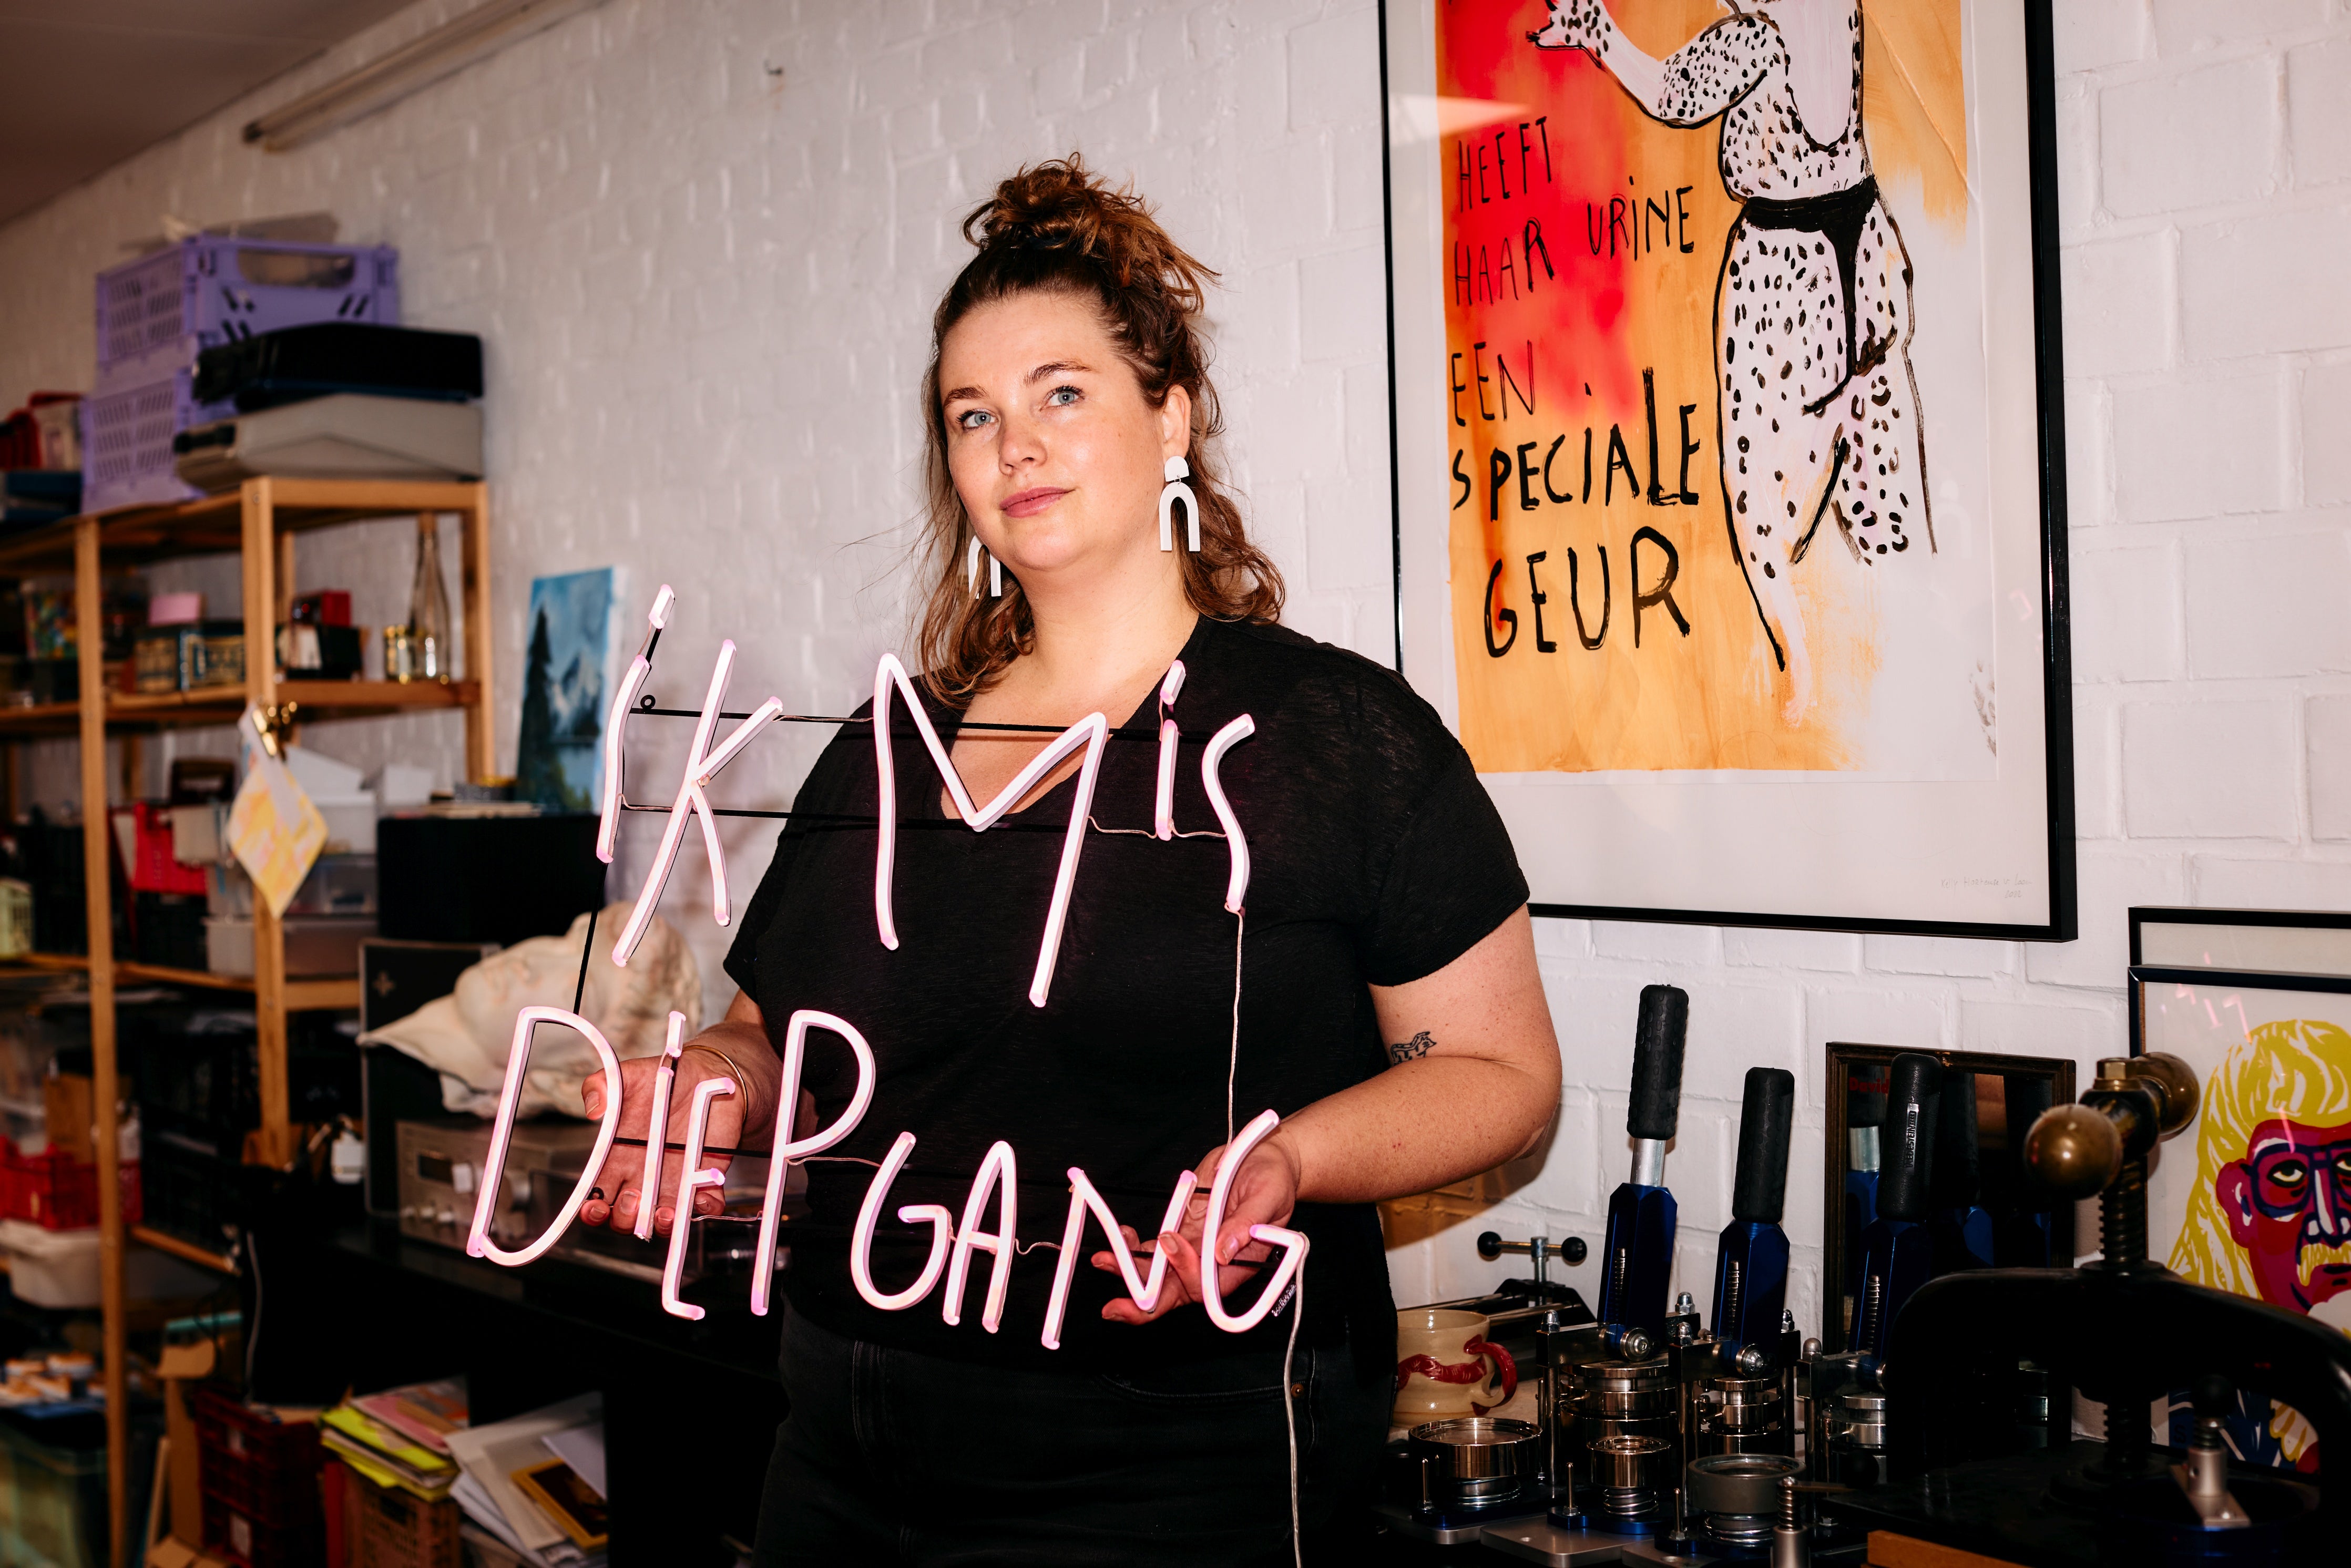 Kelly Hortense holding a LED Neon with the text "ik mis diepgang"